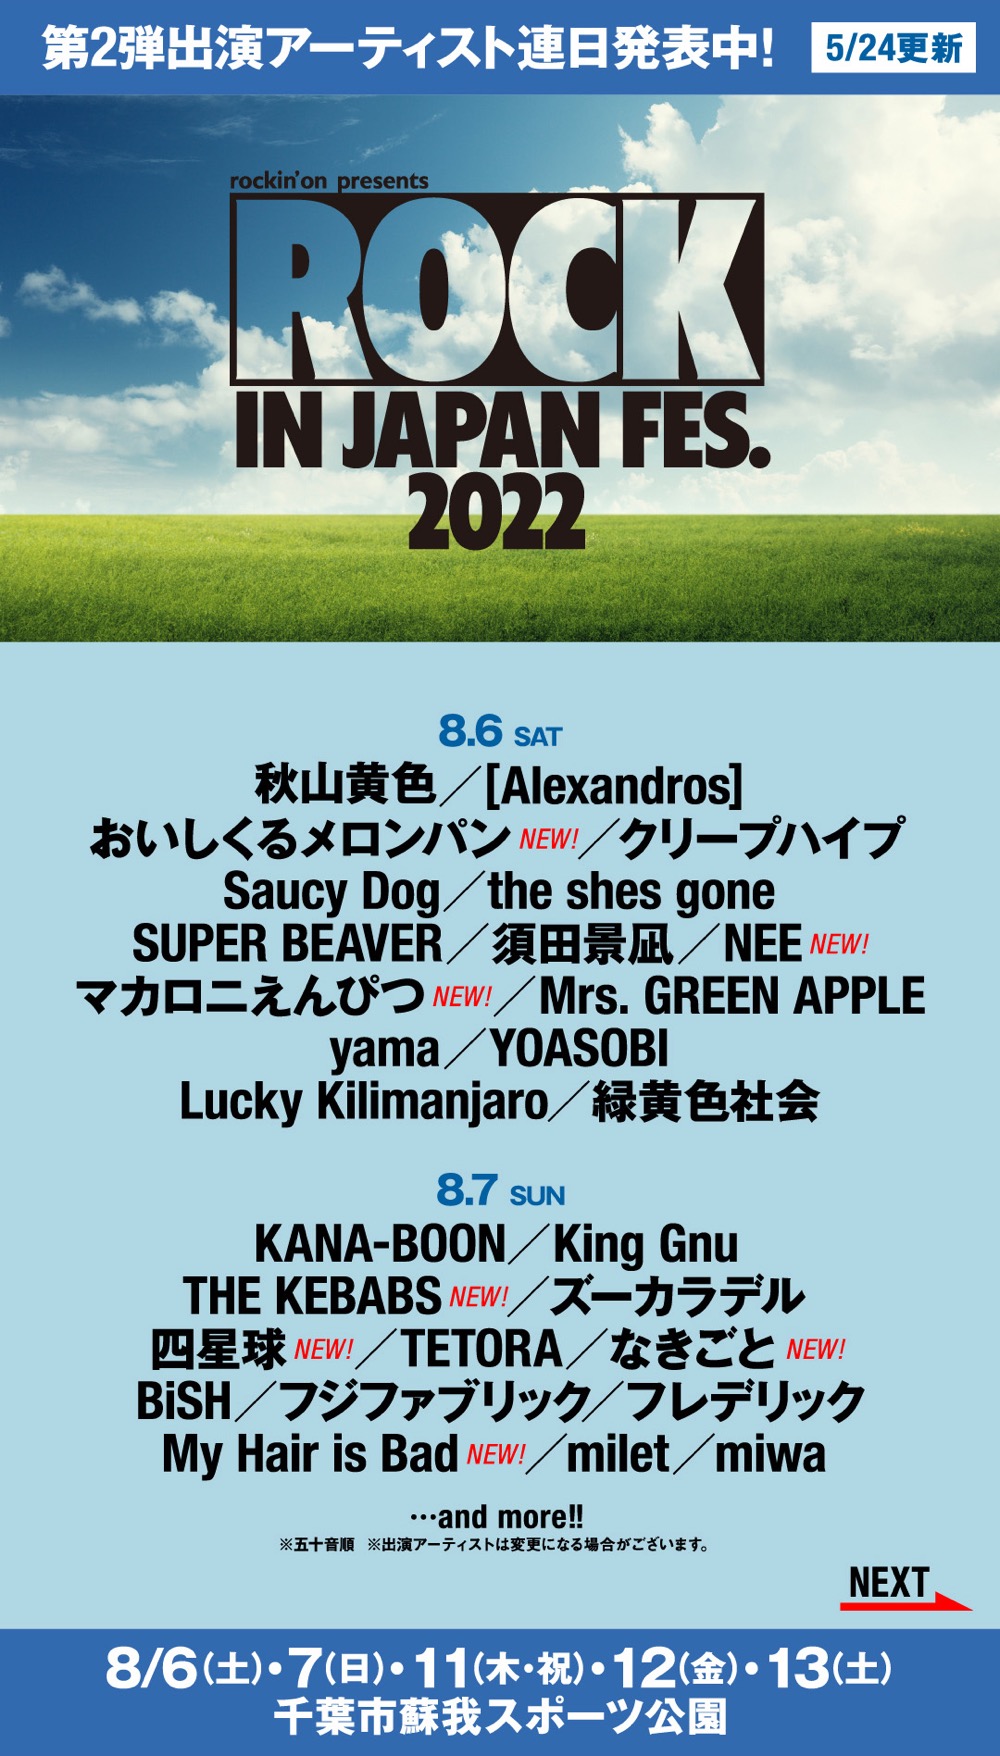 『ROCK IN JAPAN FES. 2022』マカえん、UVER、櫻坂46ら17組の出演があらたに決定 - 画像一覧（3/4）